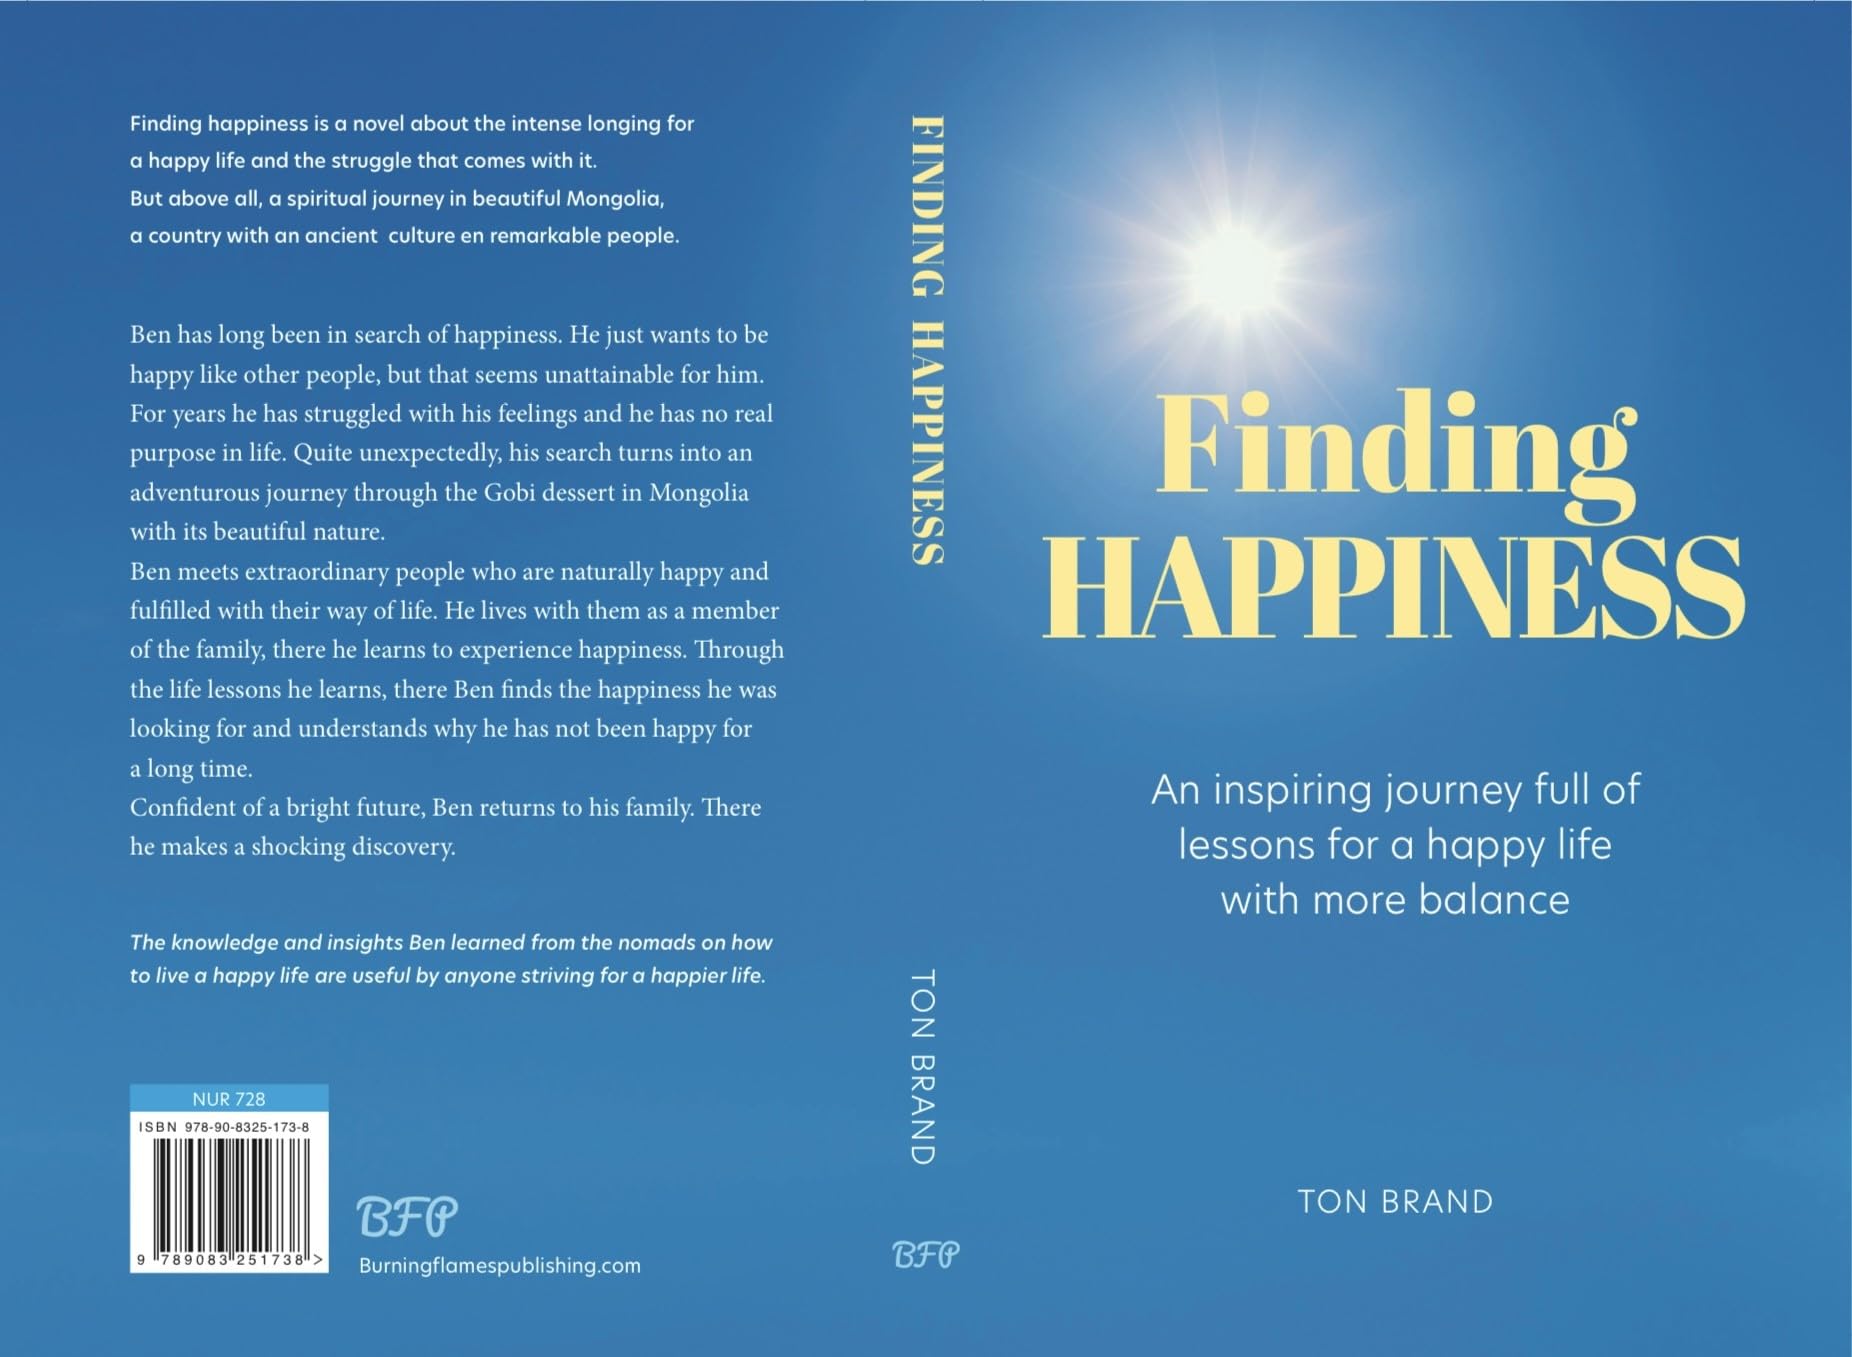 Finding Happiness: An inspiring journey full of lessons for a happy life with more balance